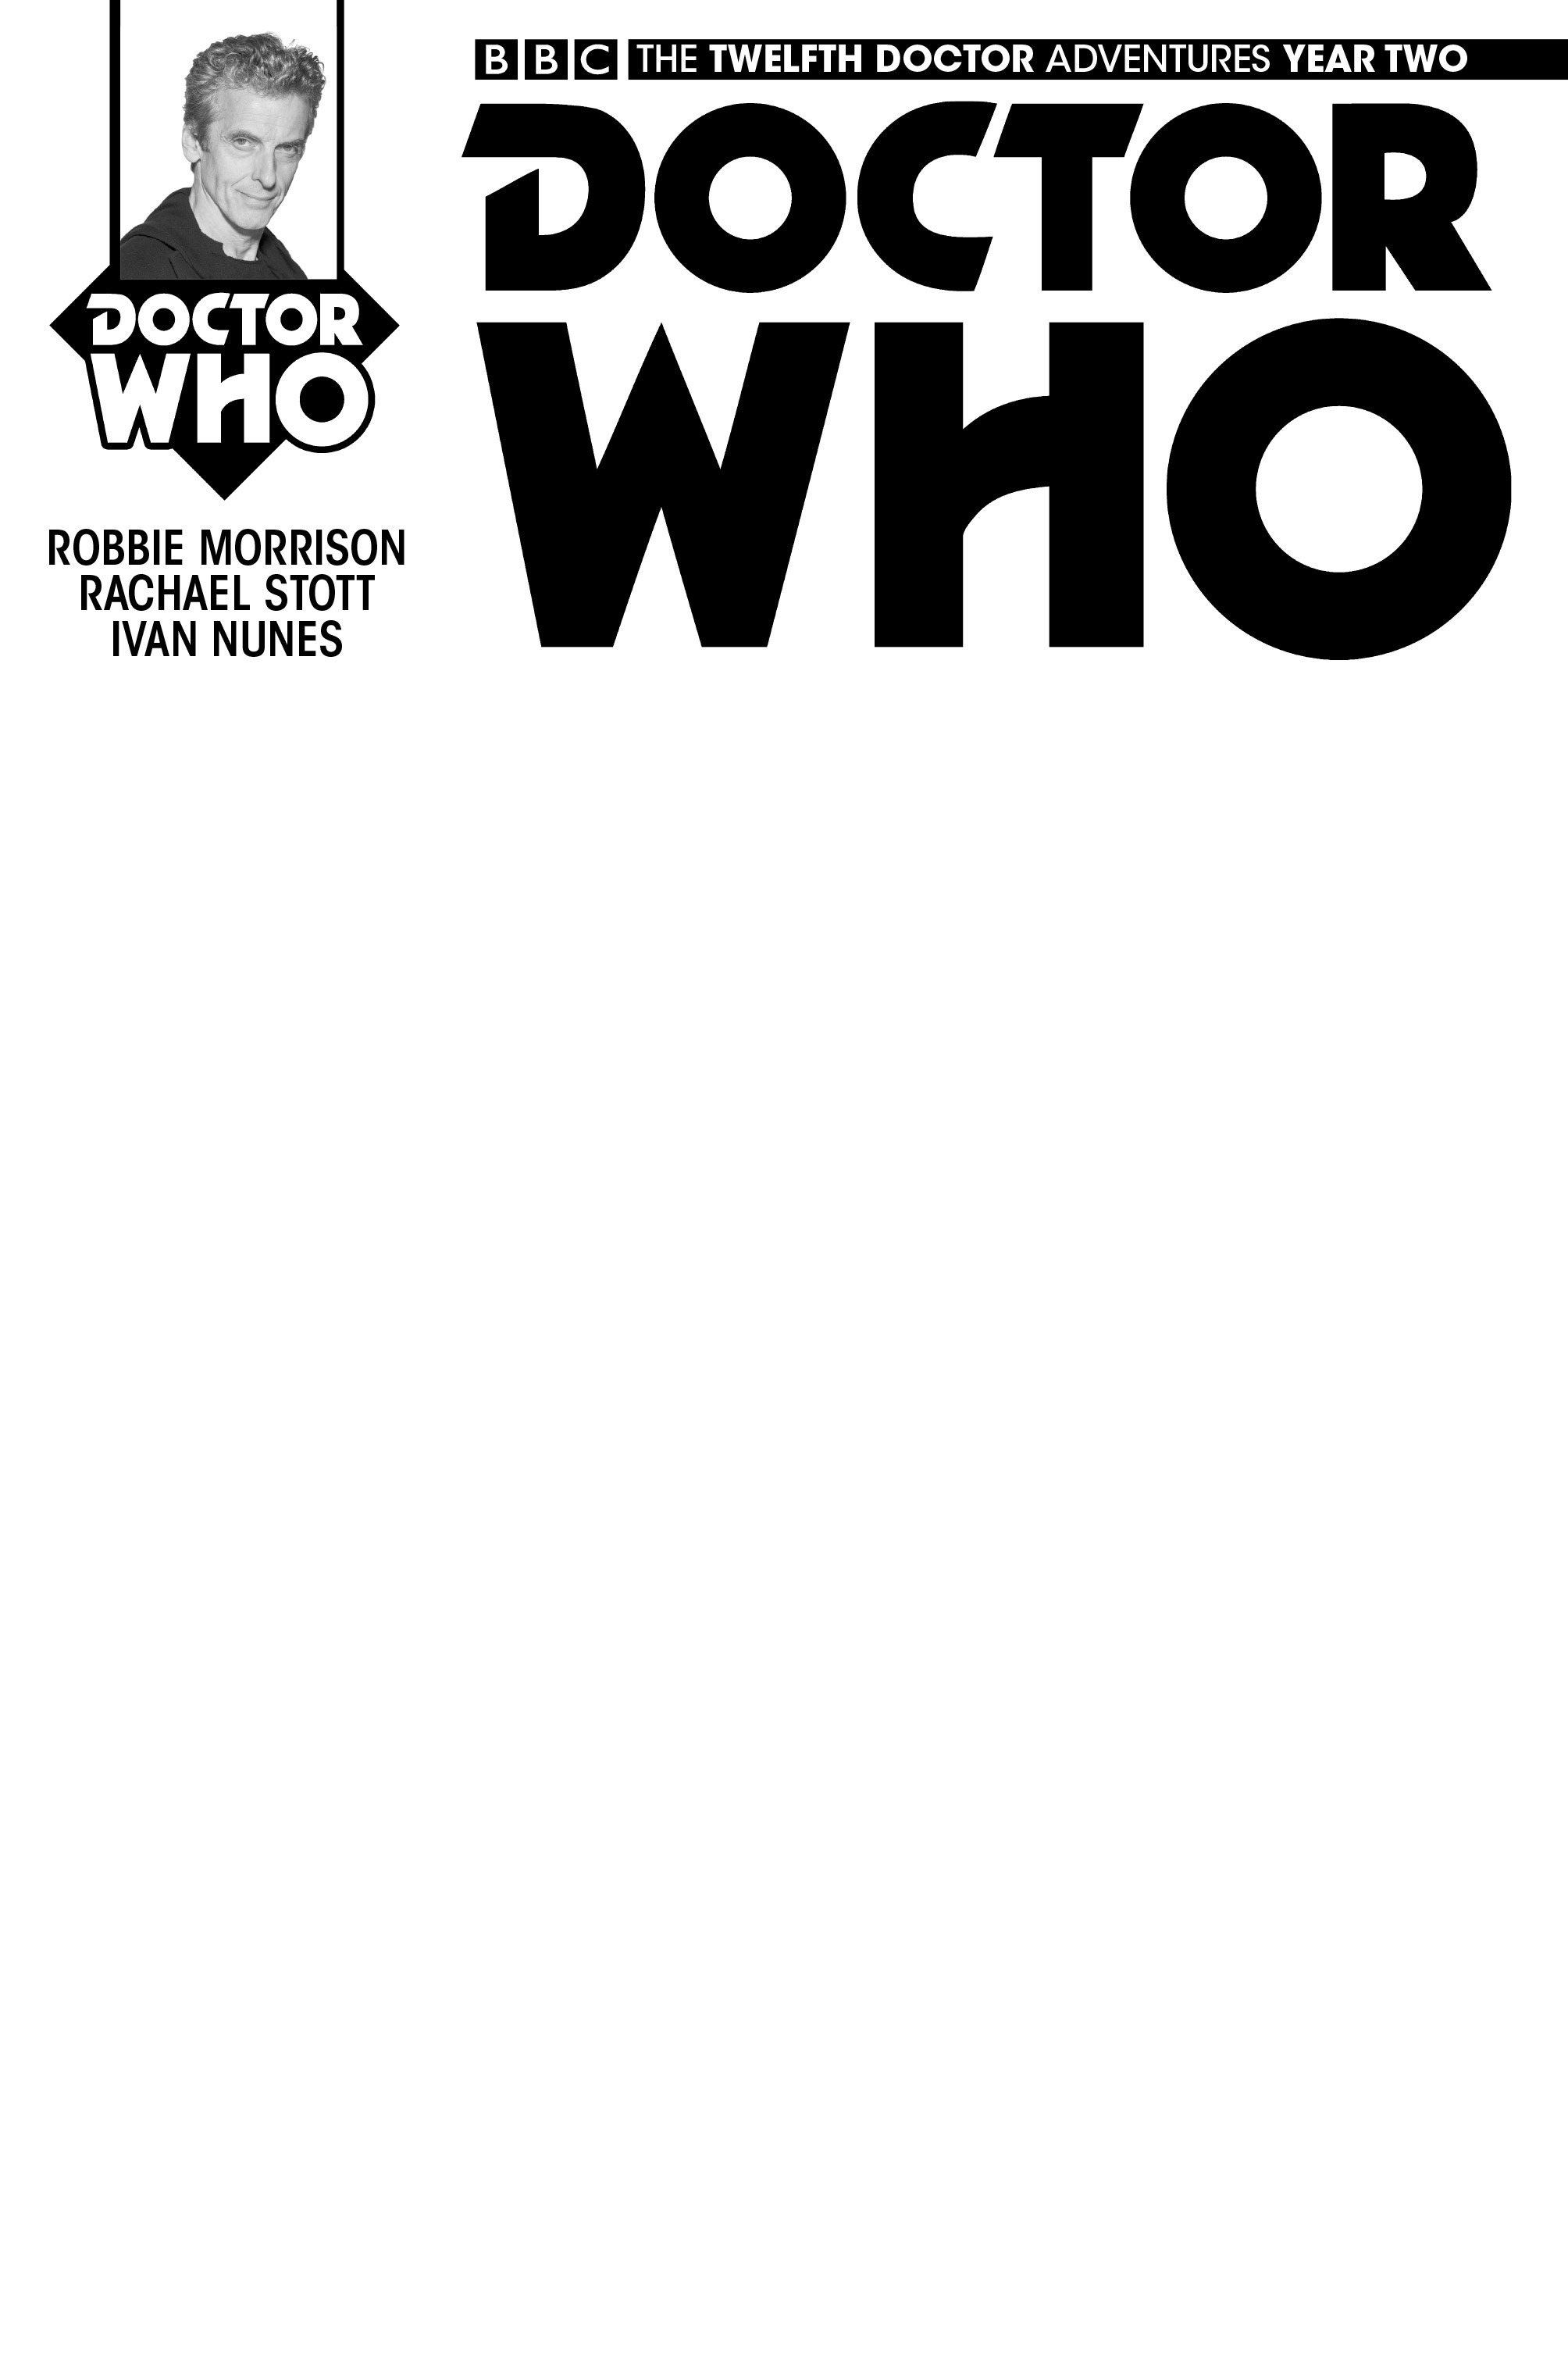 Read online Doctor Who: The Twelfth Doctor Year Two comic -  Issue #1 - 5